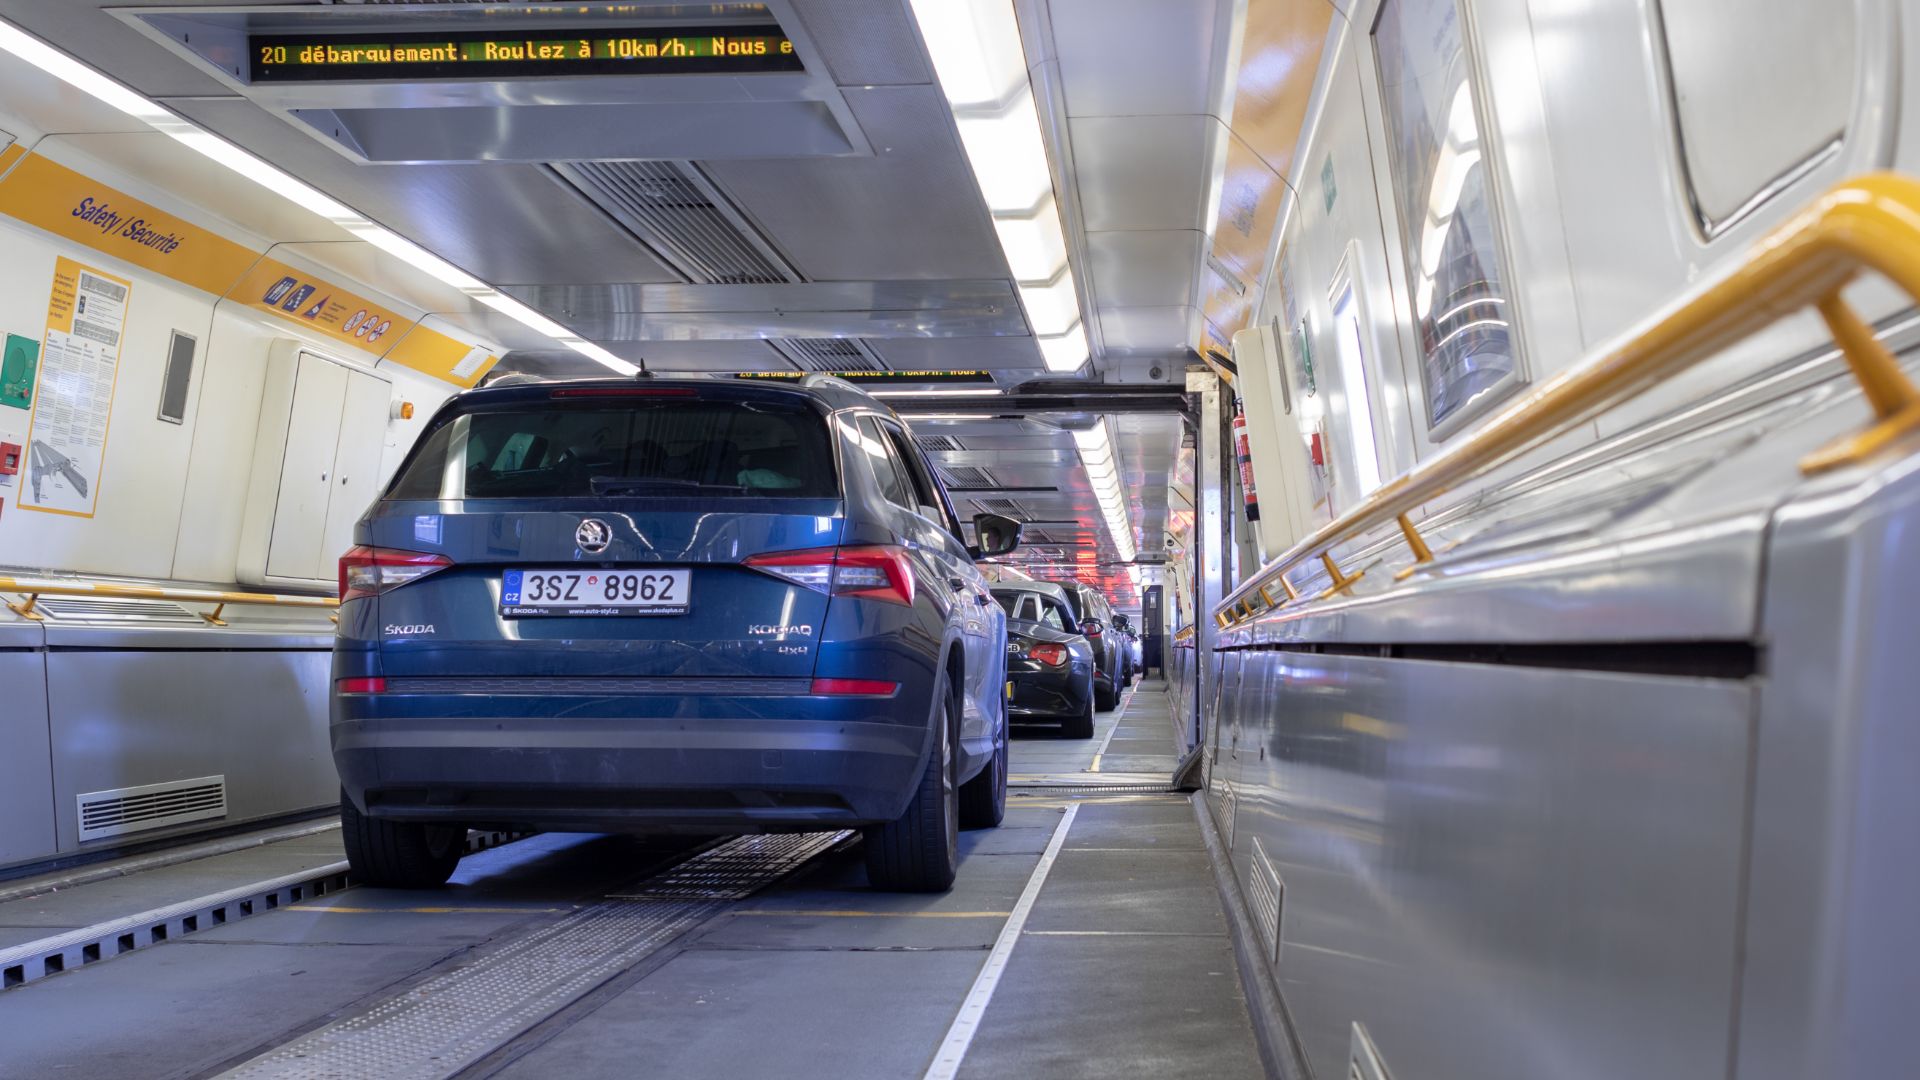 Engager Foster pust How to use the Eurotunnel for a holiday abroad